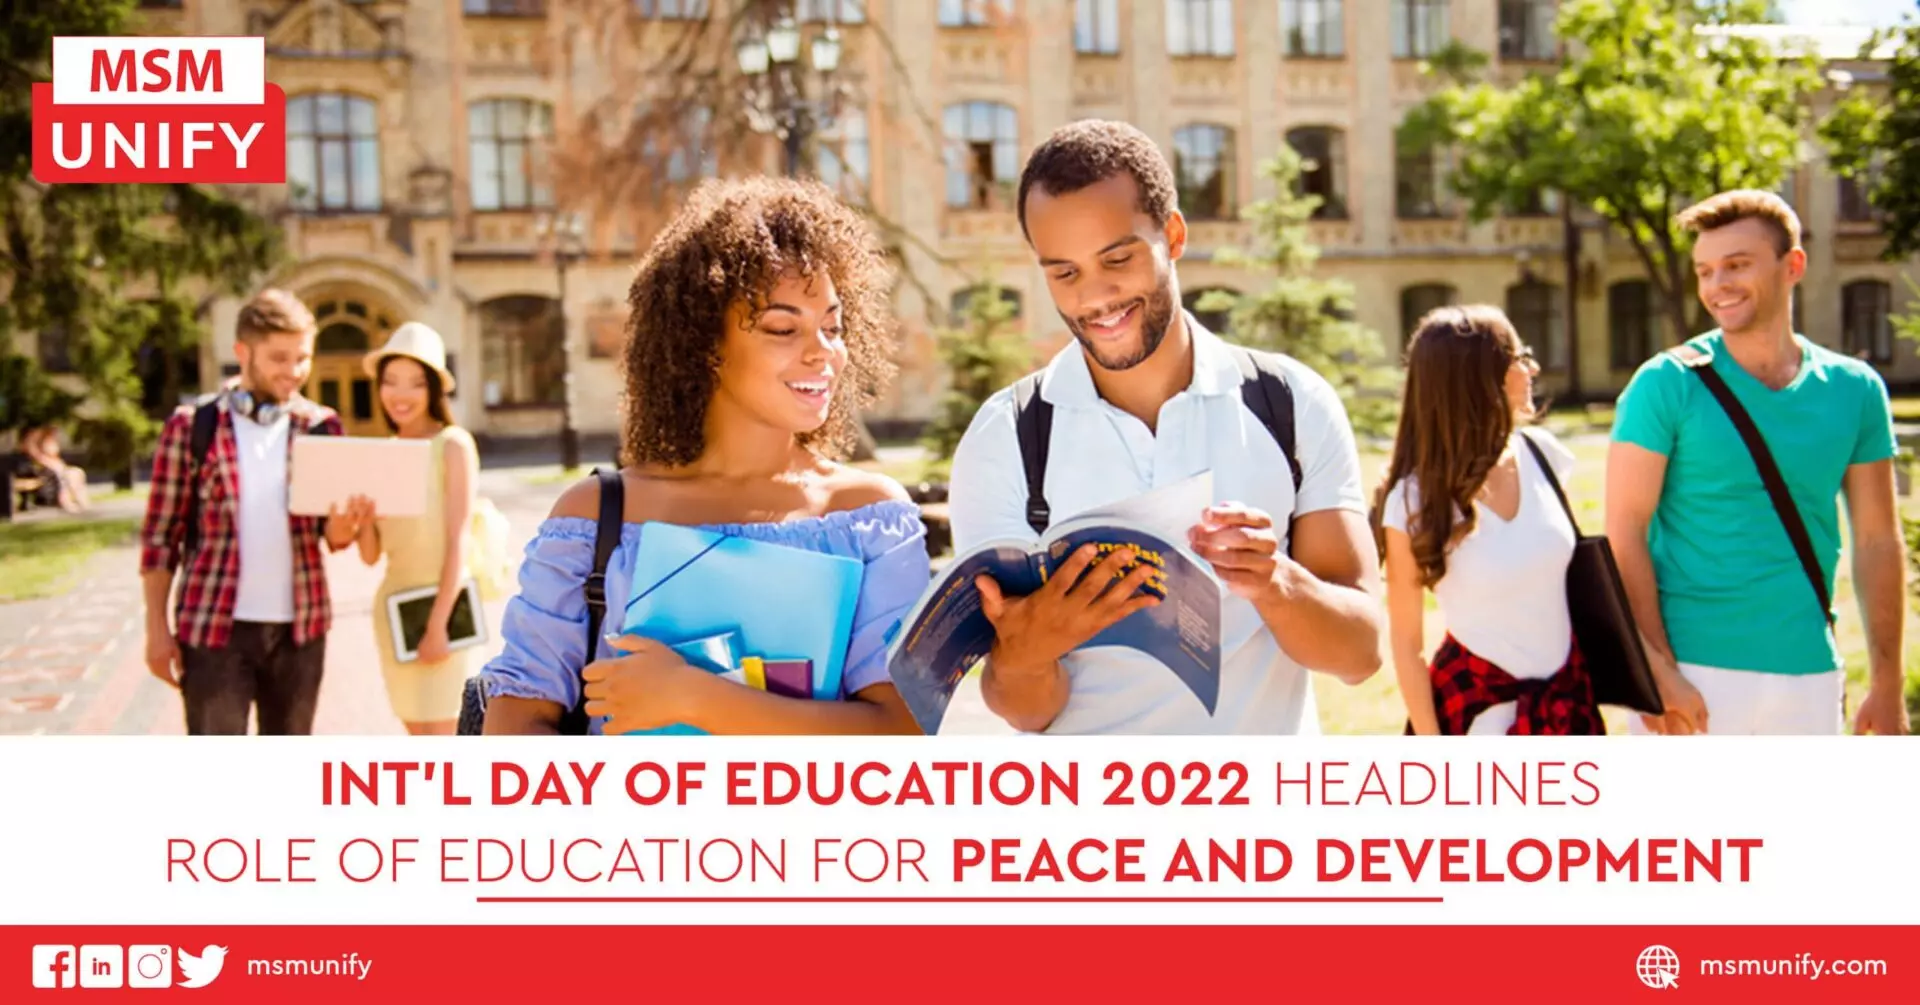 Intl Day of Education 2022 Headlines Role of Education for Peace and Development scaled 1